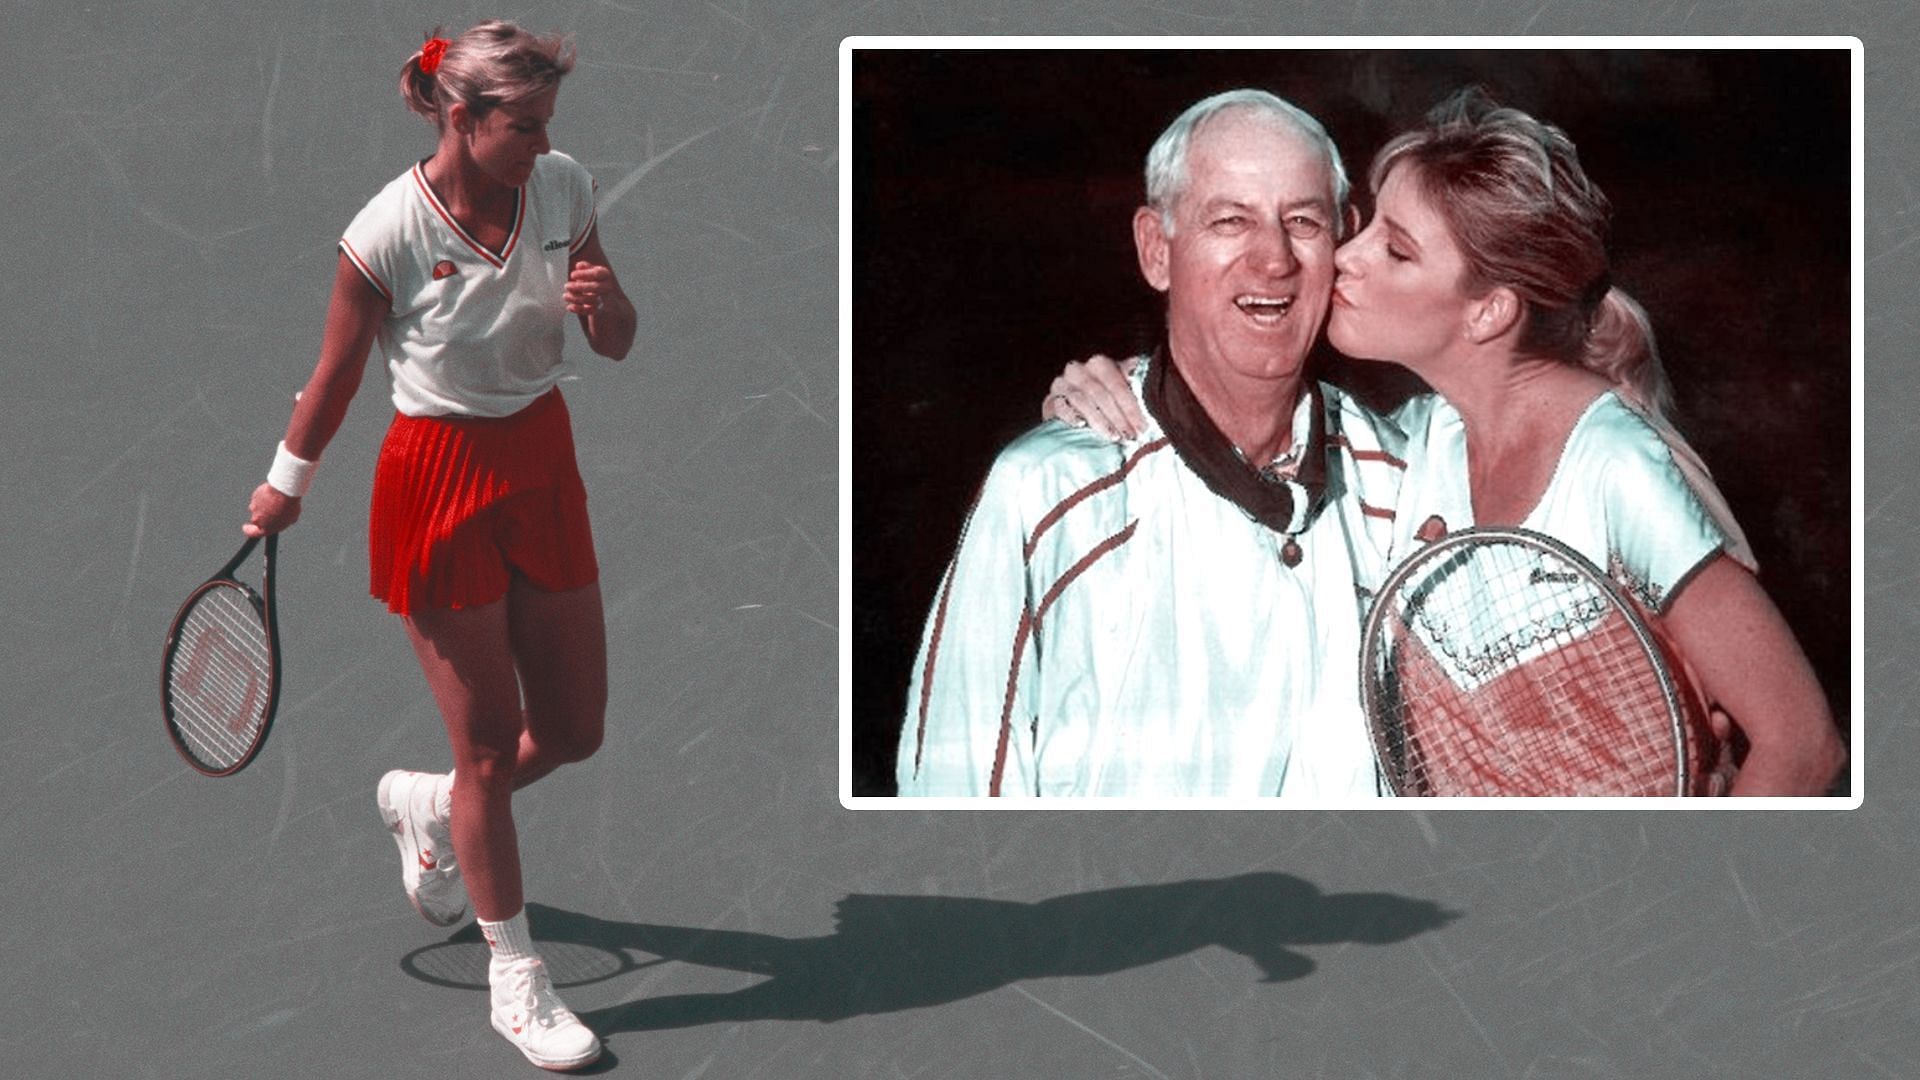 Chris Evert began taking tennis lessons from her father Jimmy Evert when she was five years old.